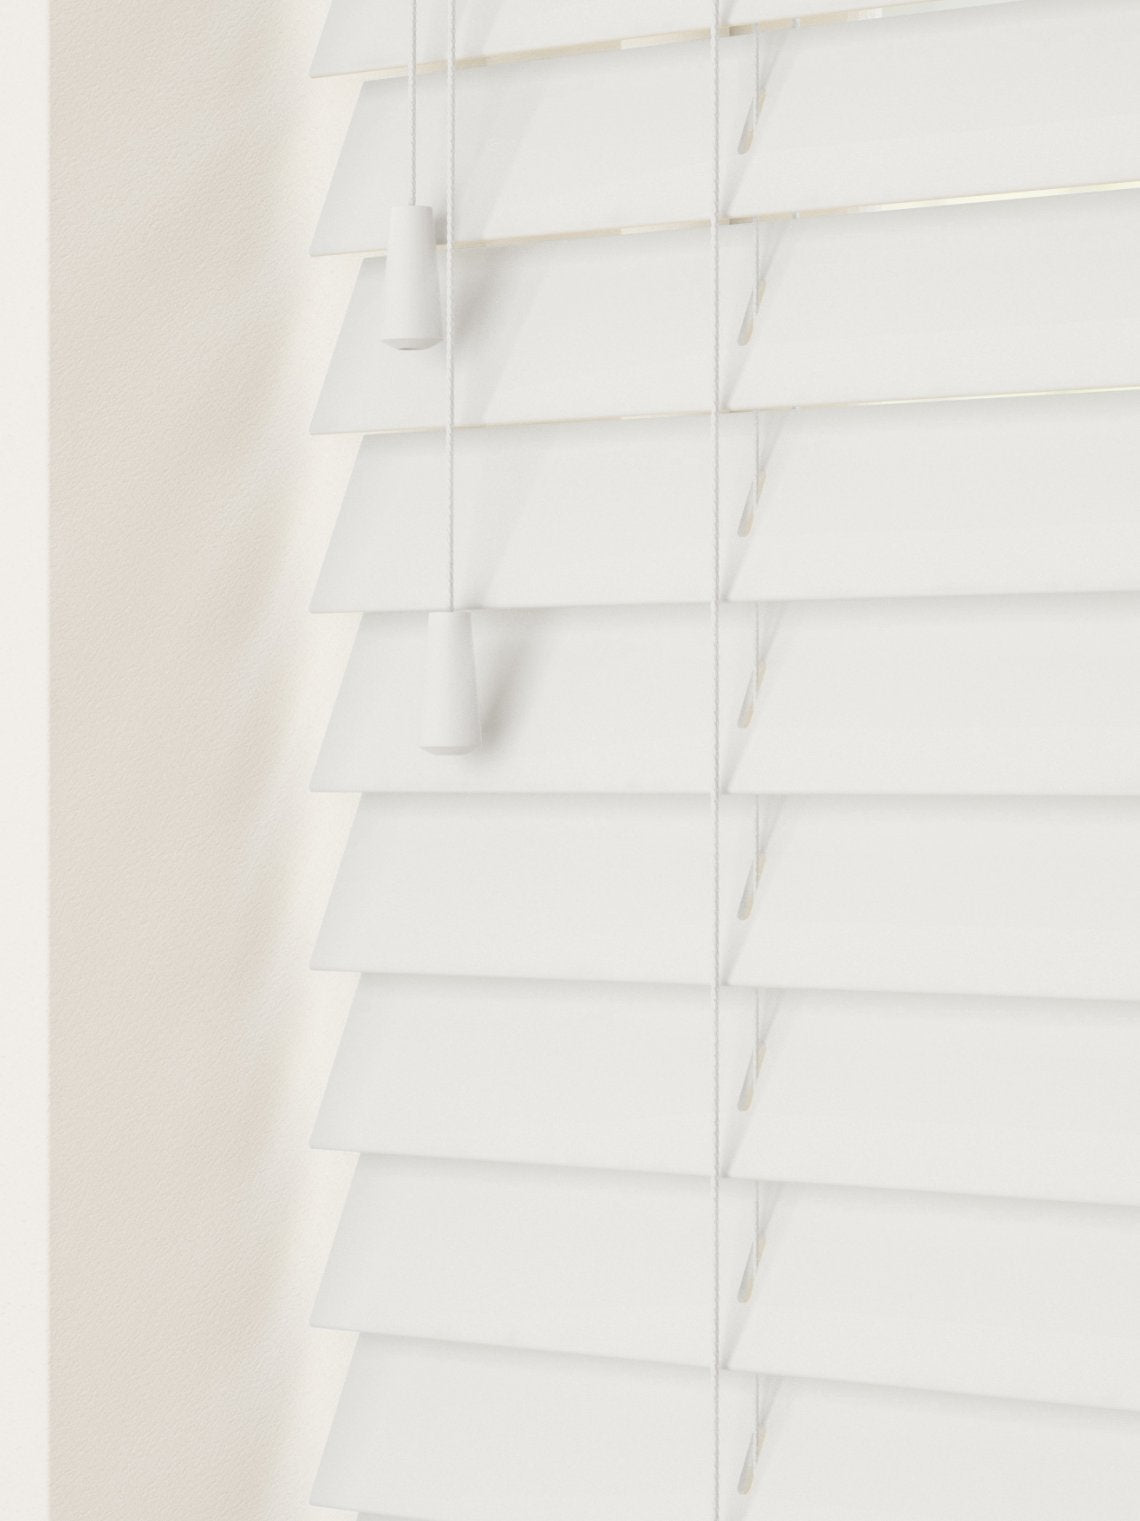 50mm Faux Wood Venetian Blinds with Ladder Strings - Painted Collection 3222